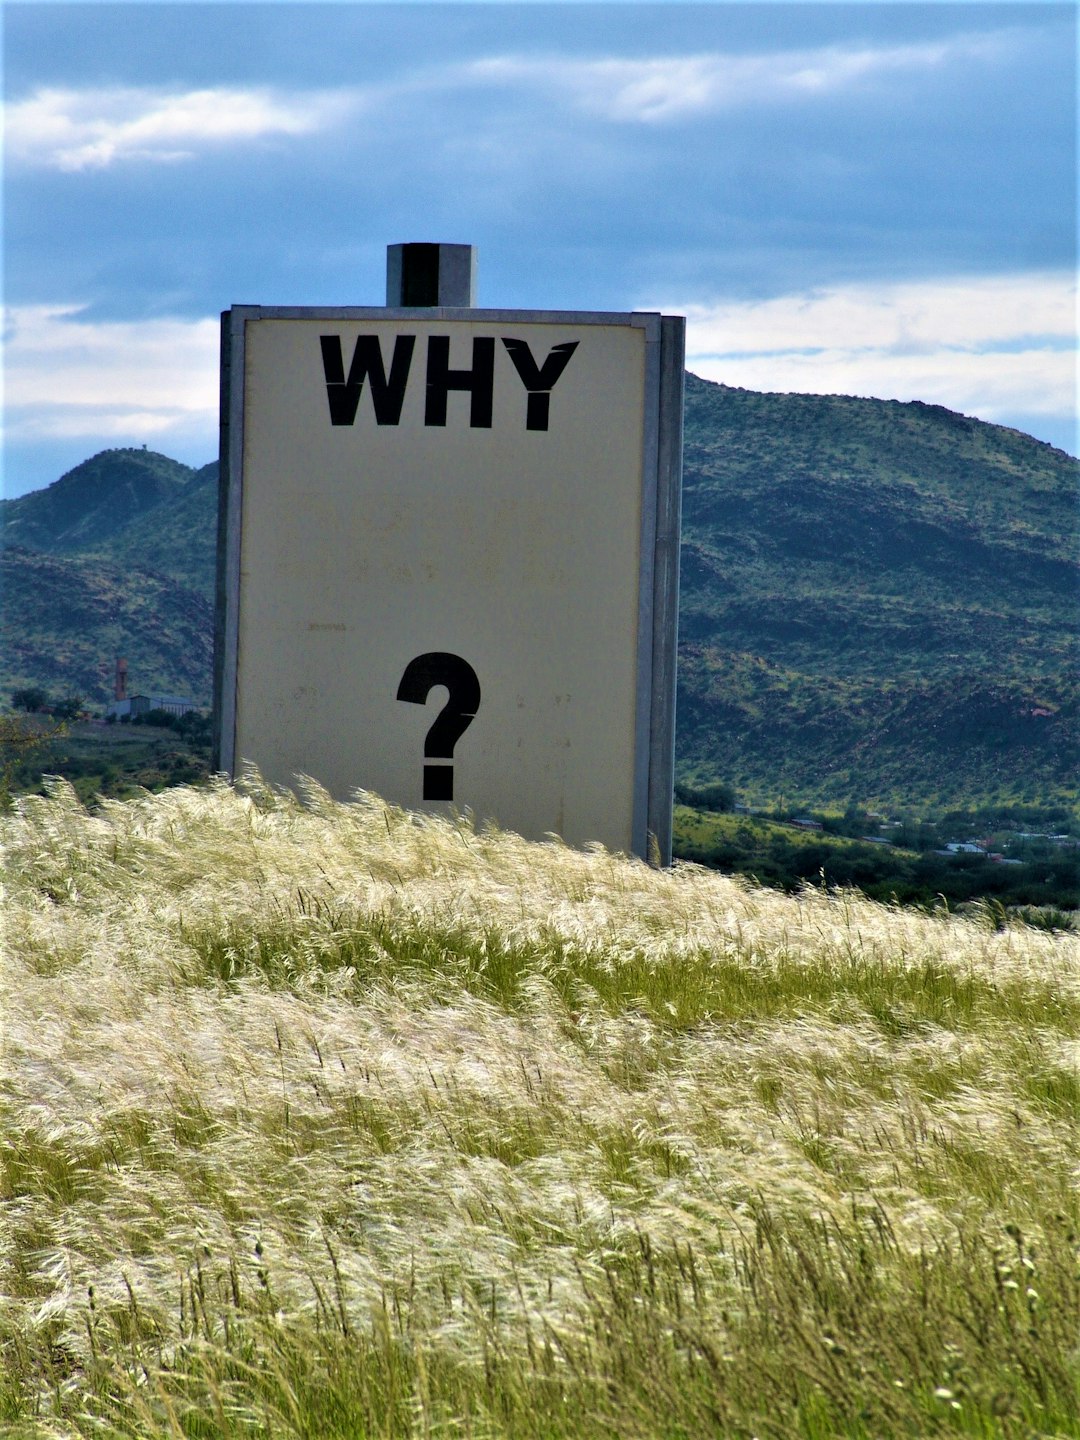 A photo of a sign in a mountain field, simply reading "Why?"